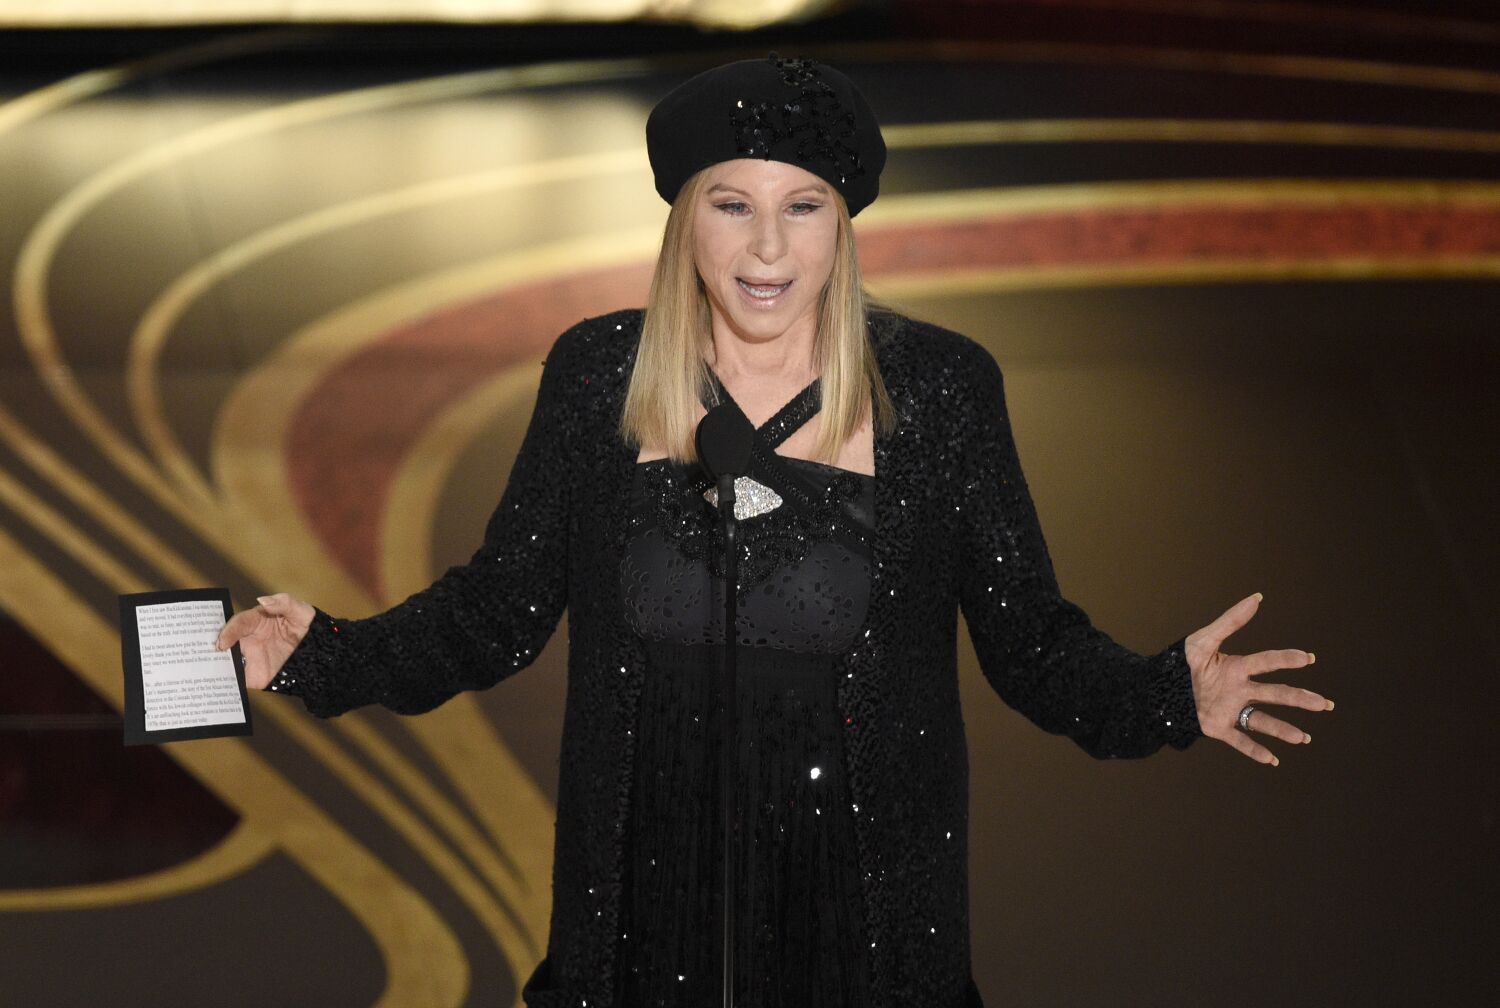 That long-promised, official Barbra Streisand memoir is finally getting published